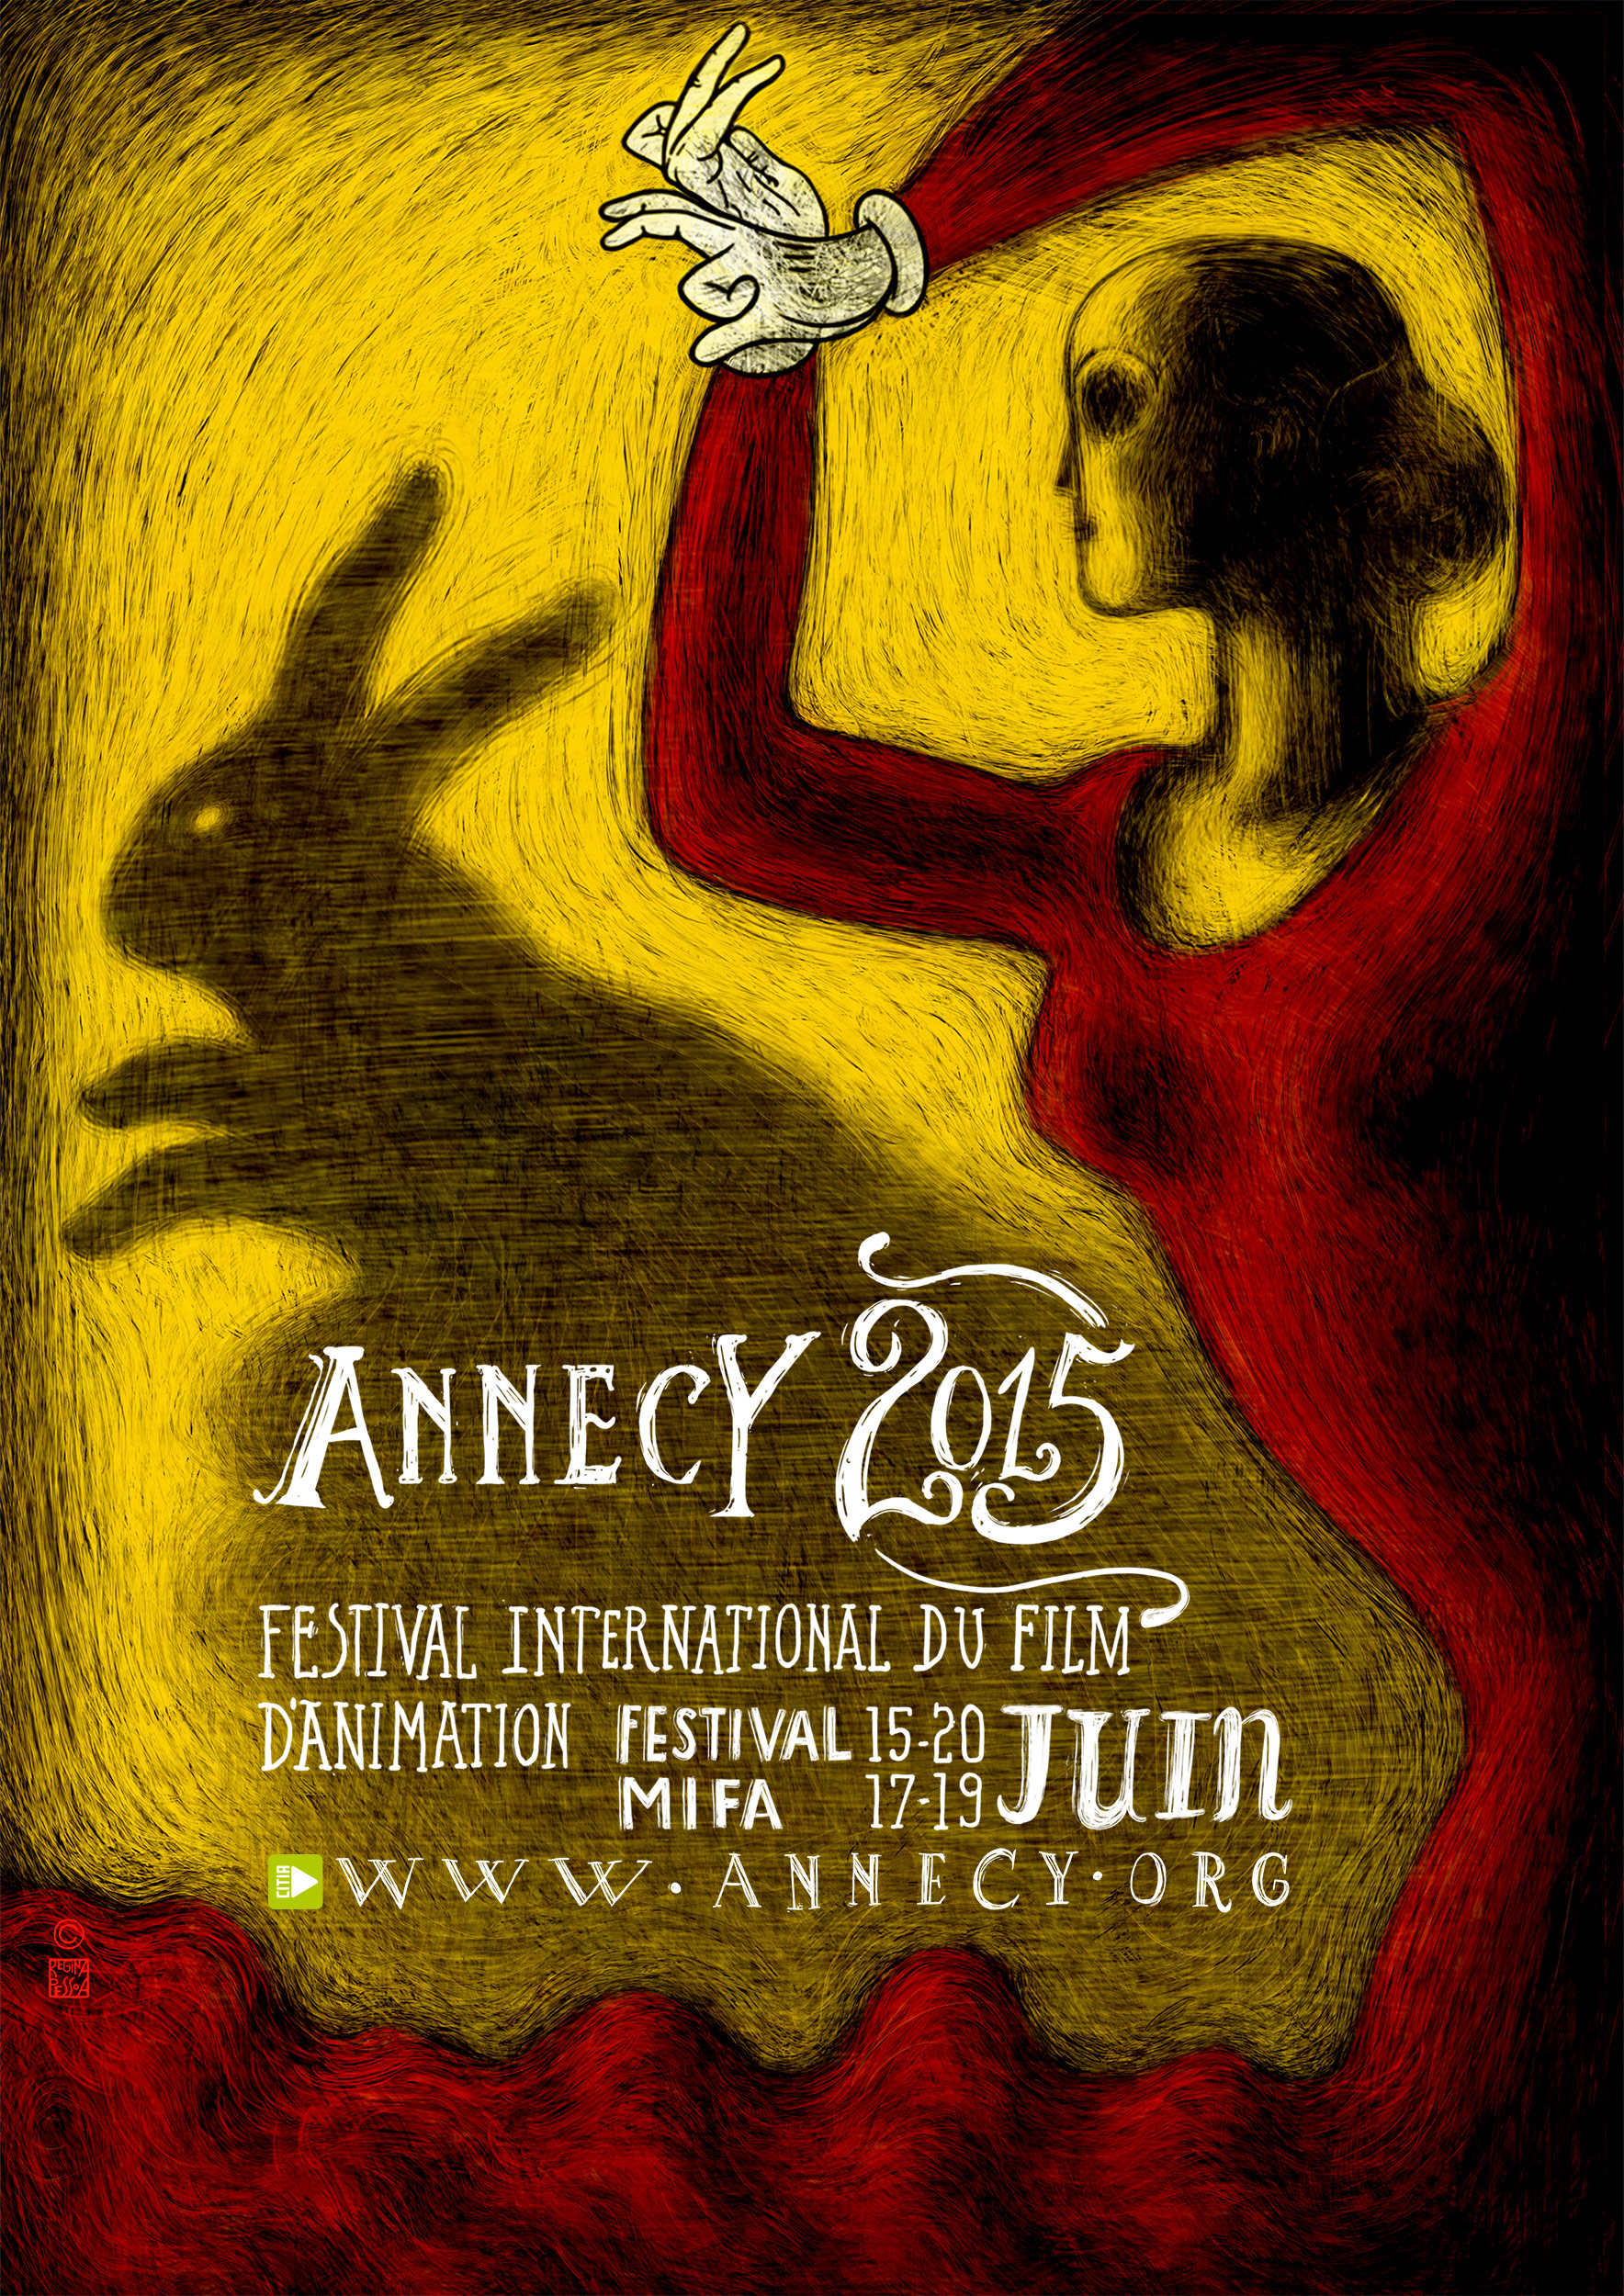 6 ADM films selected at the Annecy festival!!